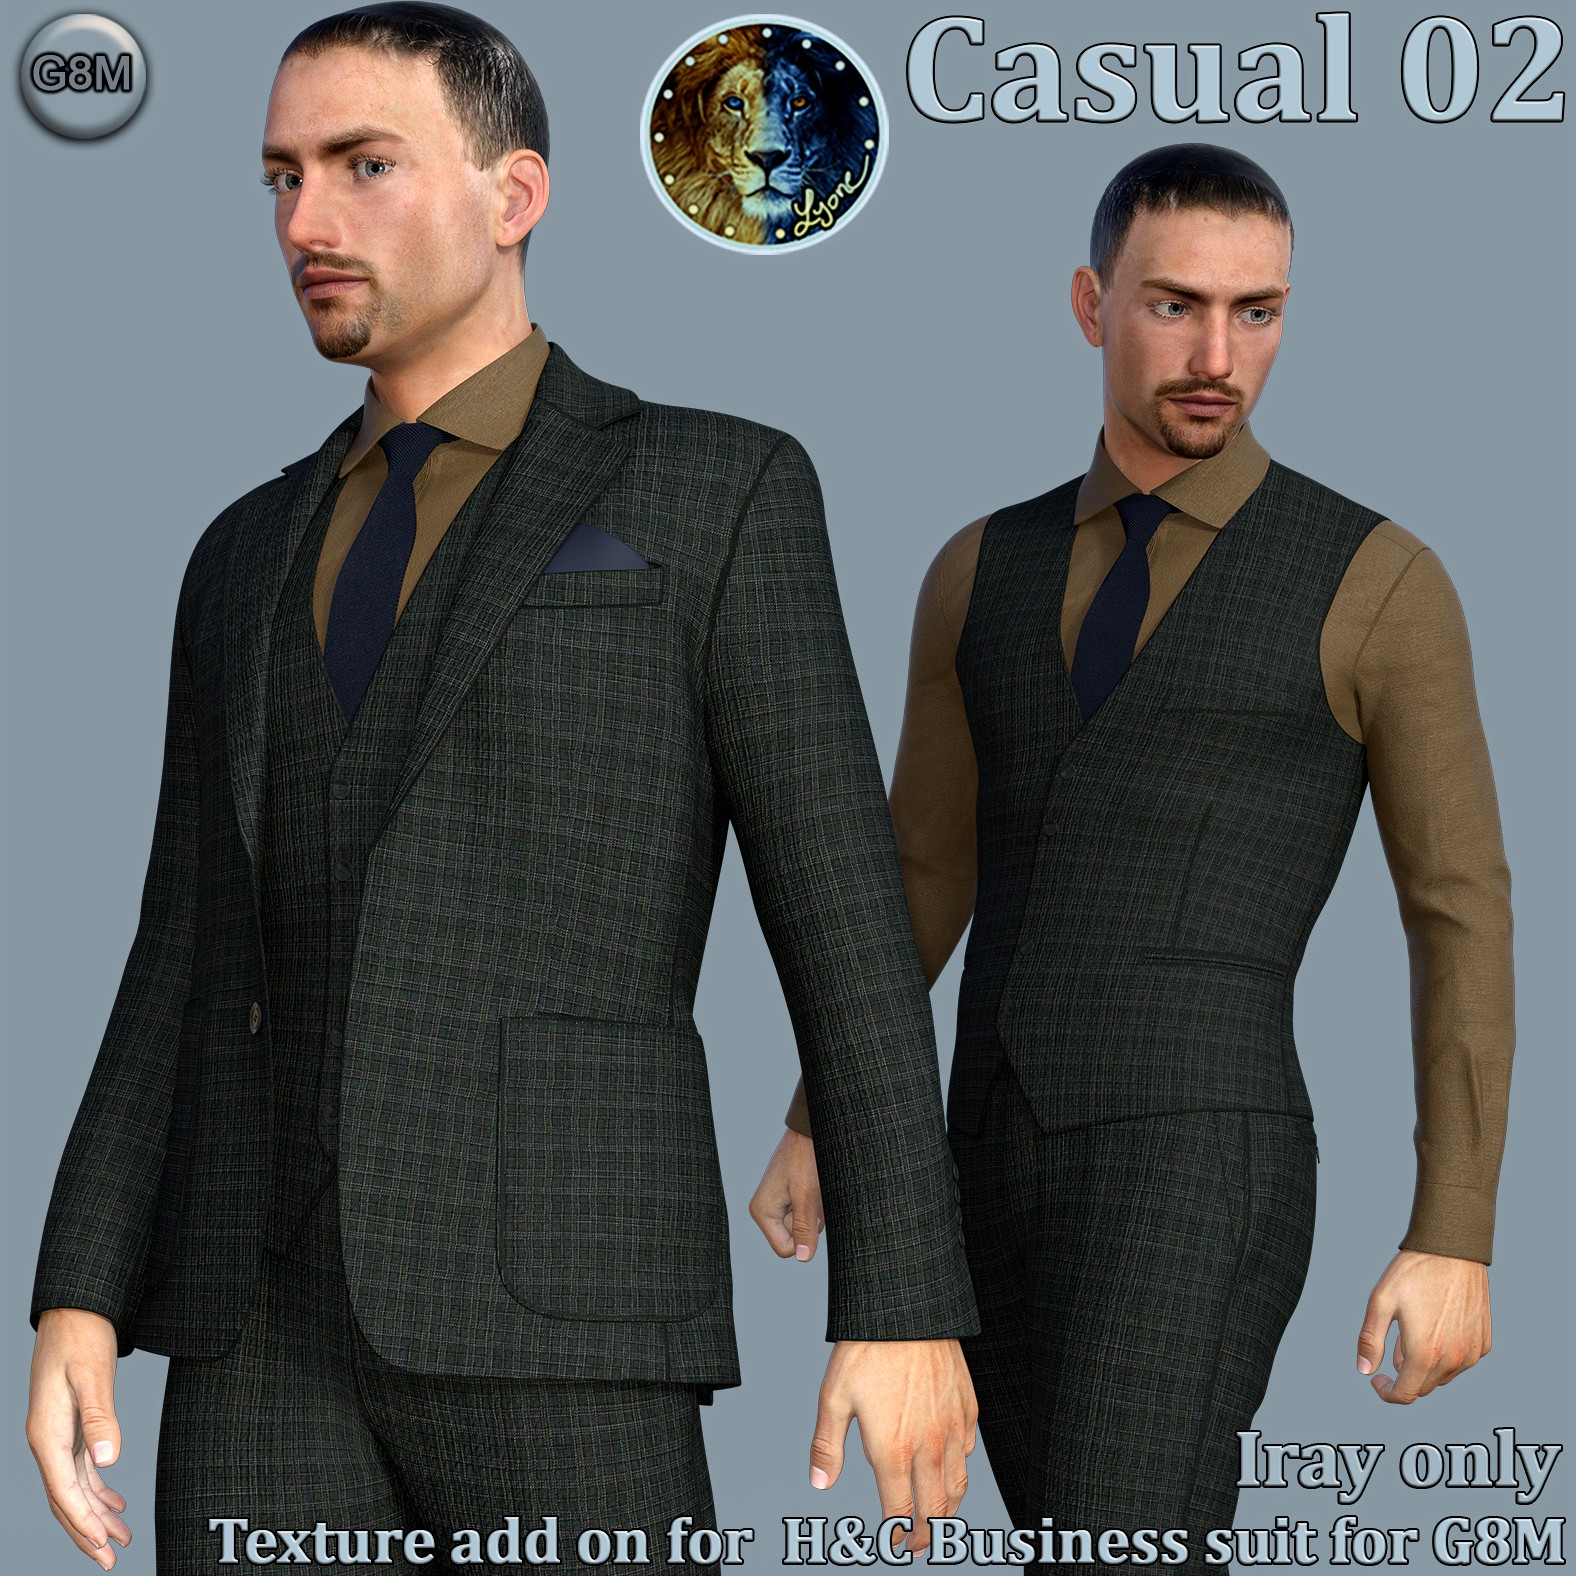 Casual 02 for H and C Business Suit for G8M